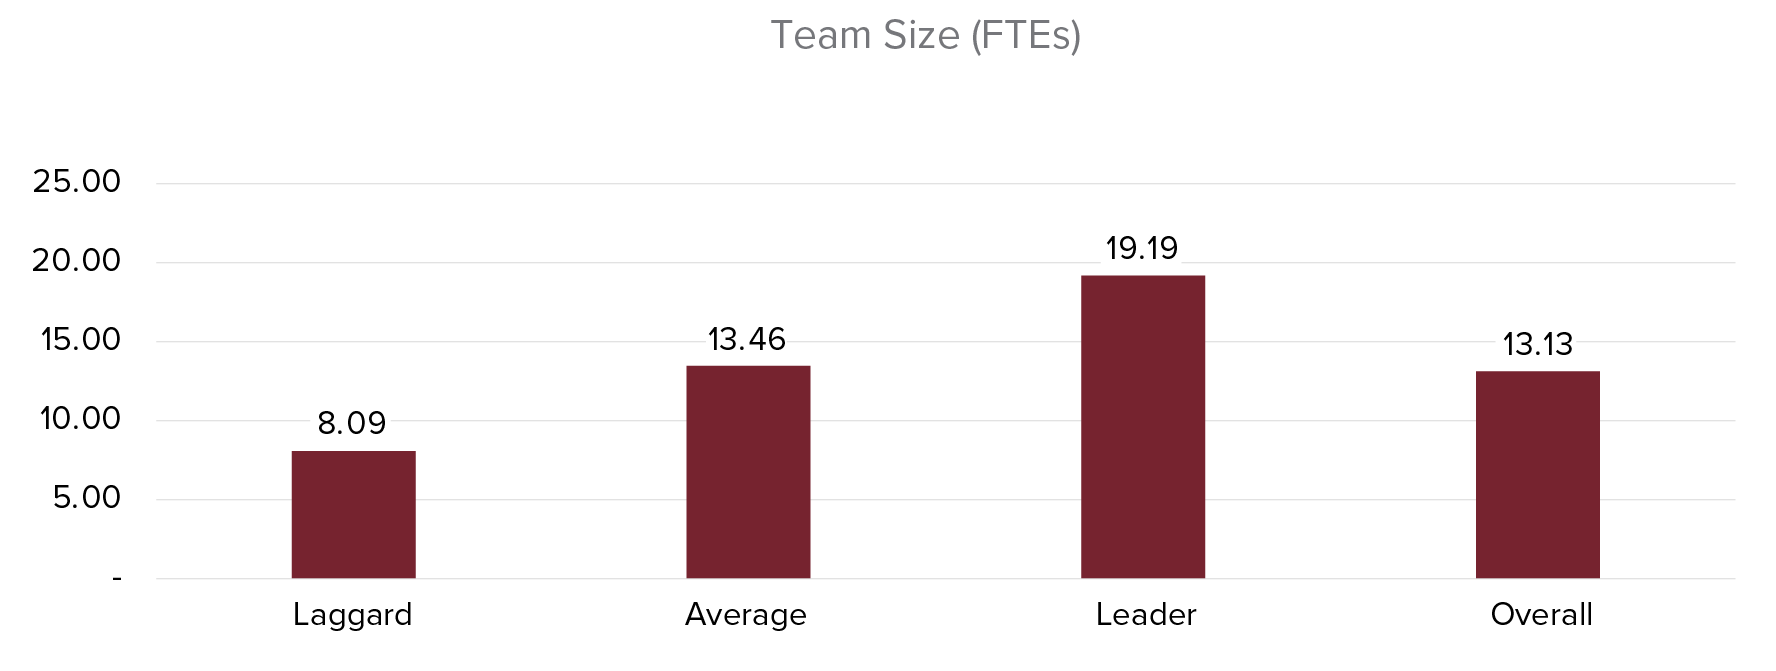 bar graph showing variations in team size